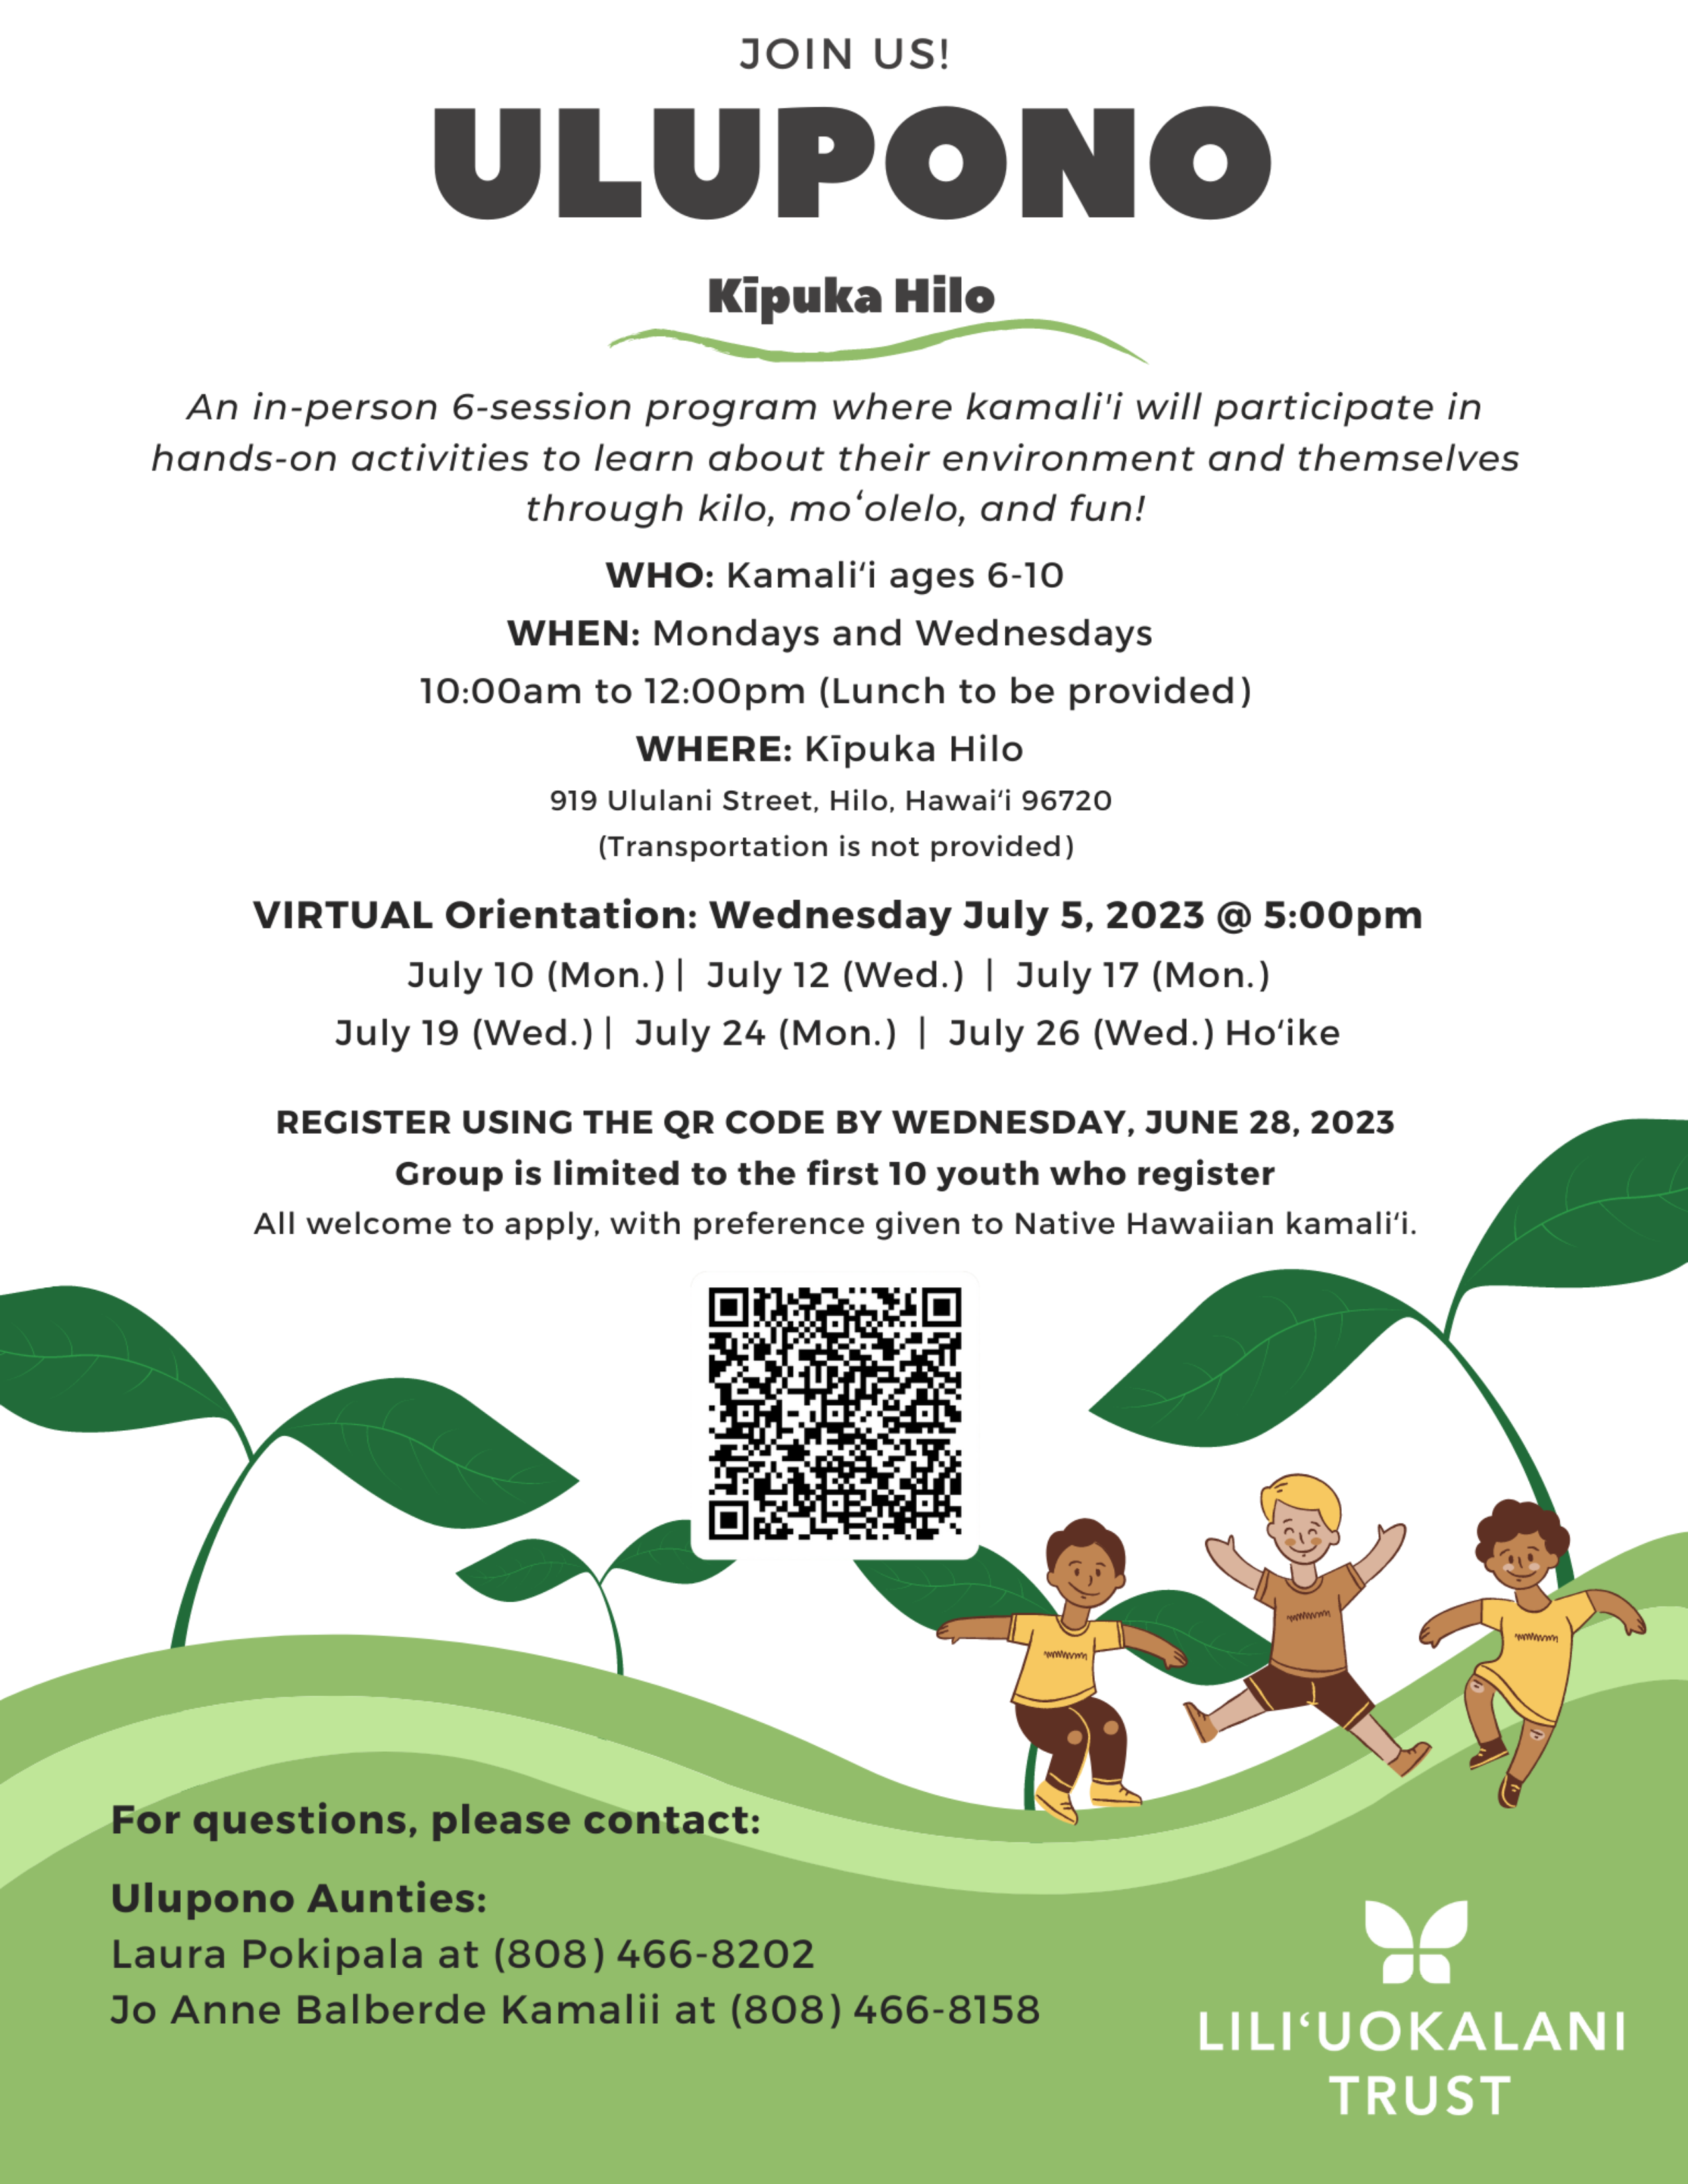 Flyer for Ulupono Hilo, an in-person 6-session program where kamaliʻi will participate in hands-on activities to learn about their environment and themselves. Mondays and Wednesdays, July 10 - 26, 2023.